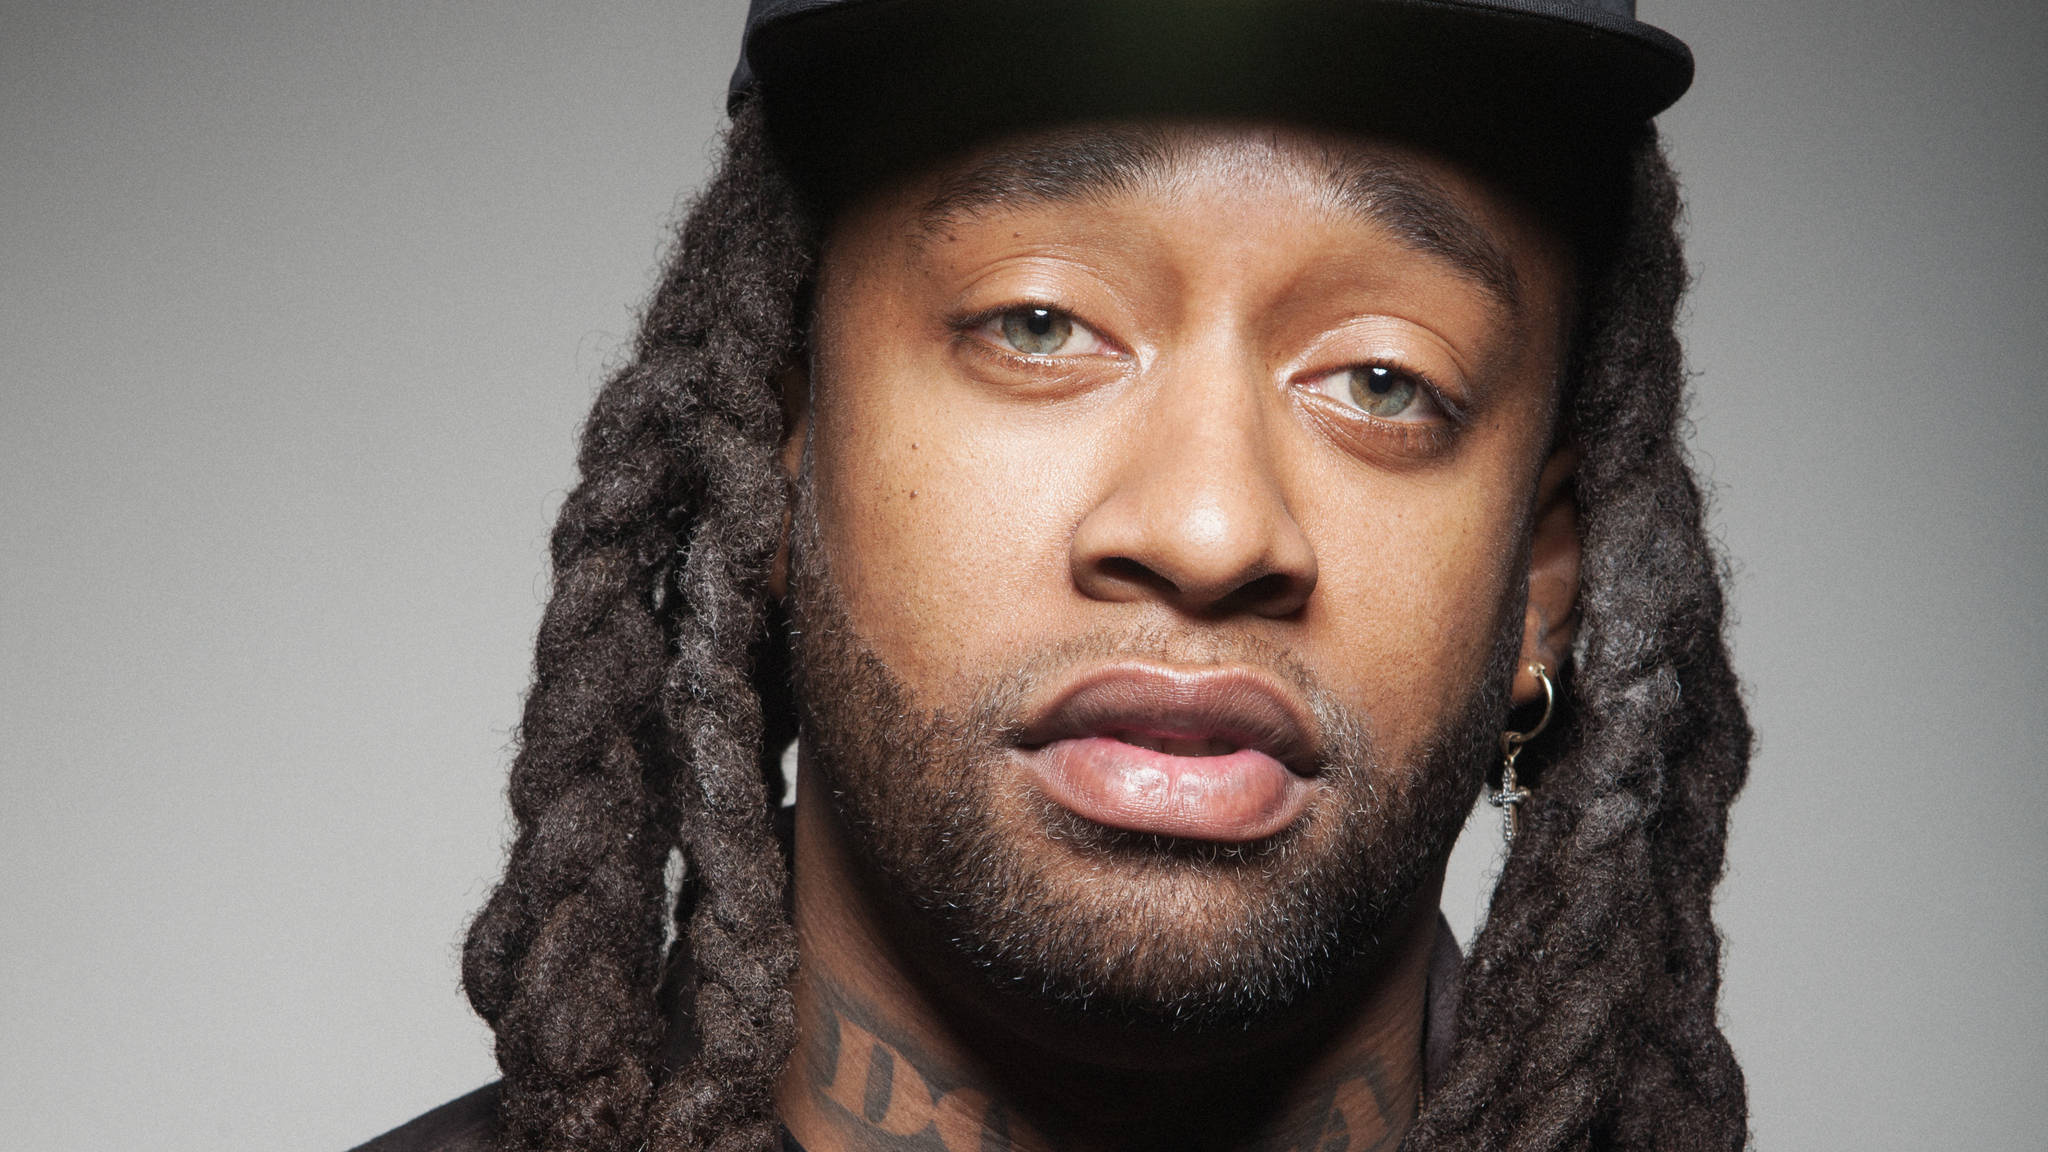 Ty Dolla Sign, Rapper wallpaper, Cool vibes, Ty Dolla Ign, 2050x1160 HD Desktop